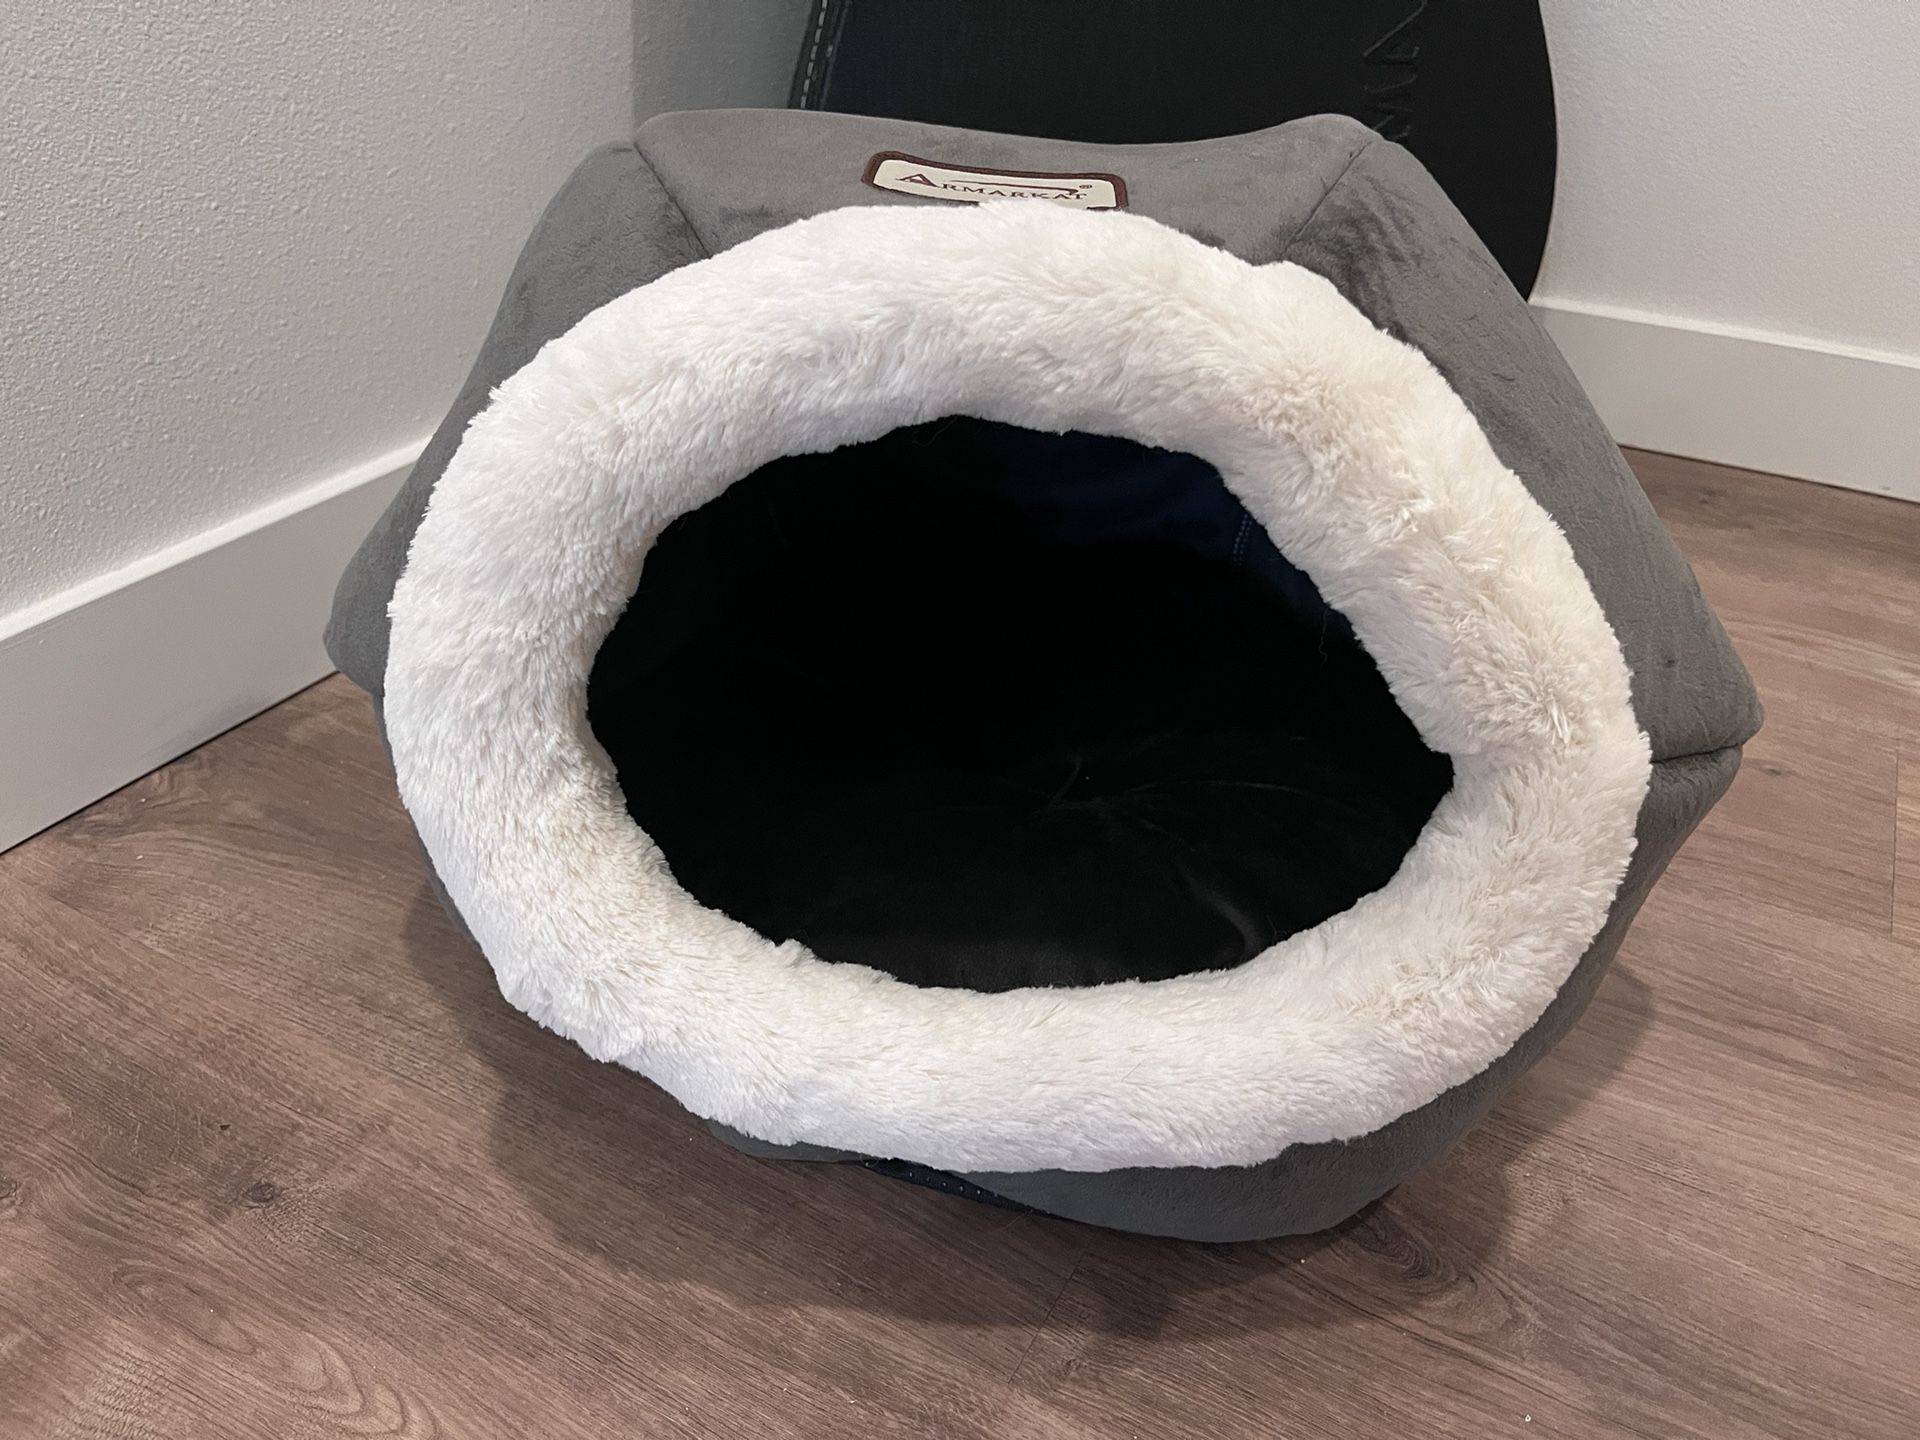  brand new cat bed and Hills cat dry food